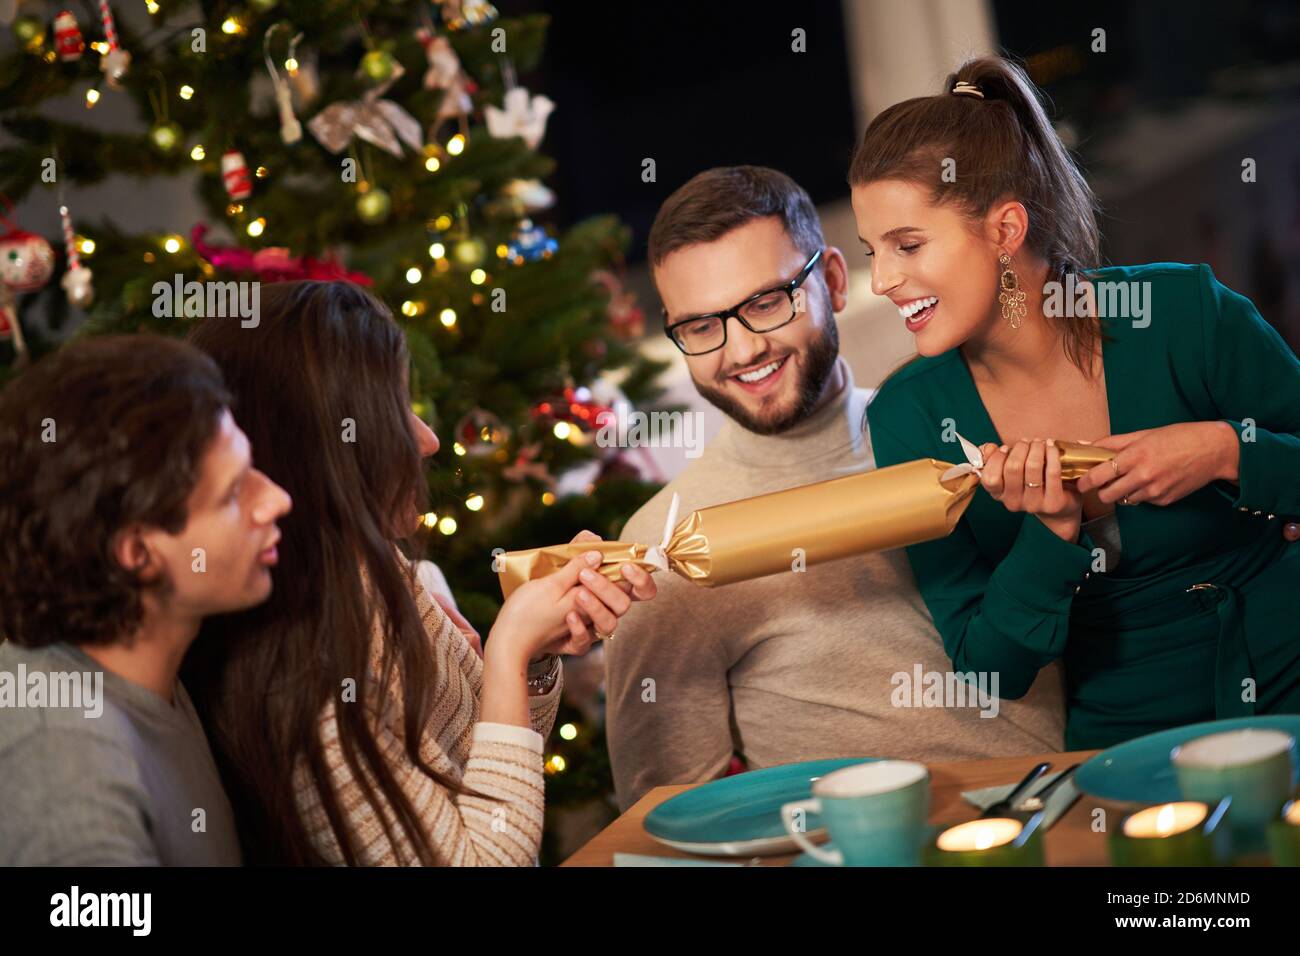 Group of friends celebrating Christmas by pulling crackers Stock Photo